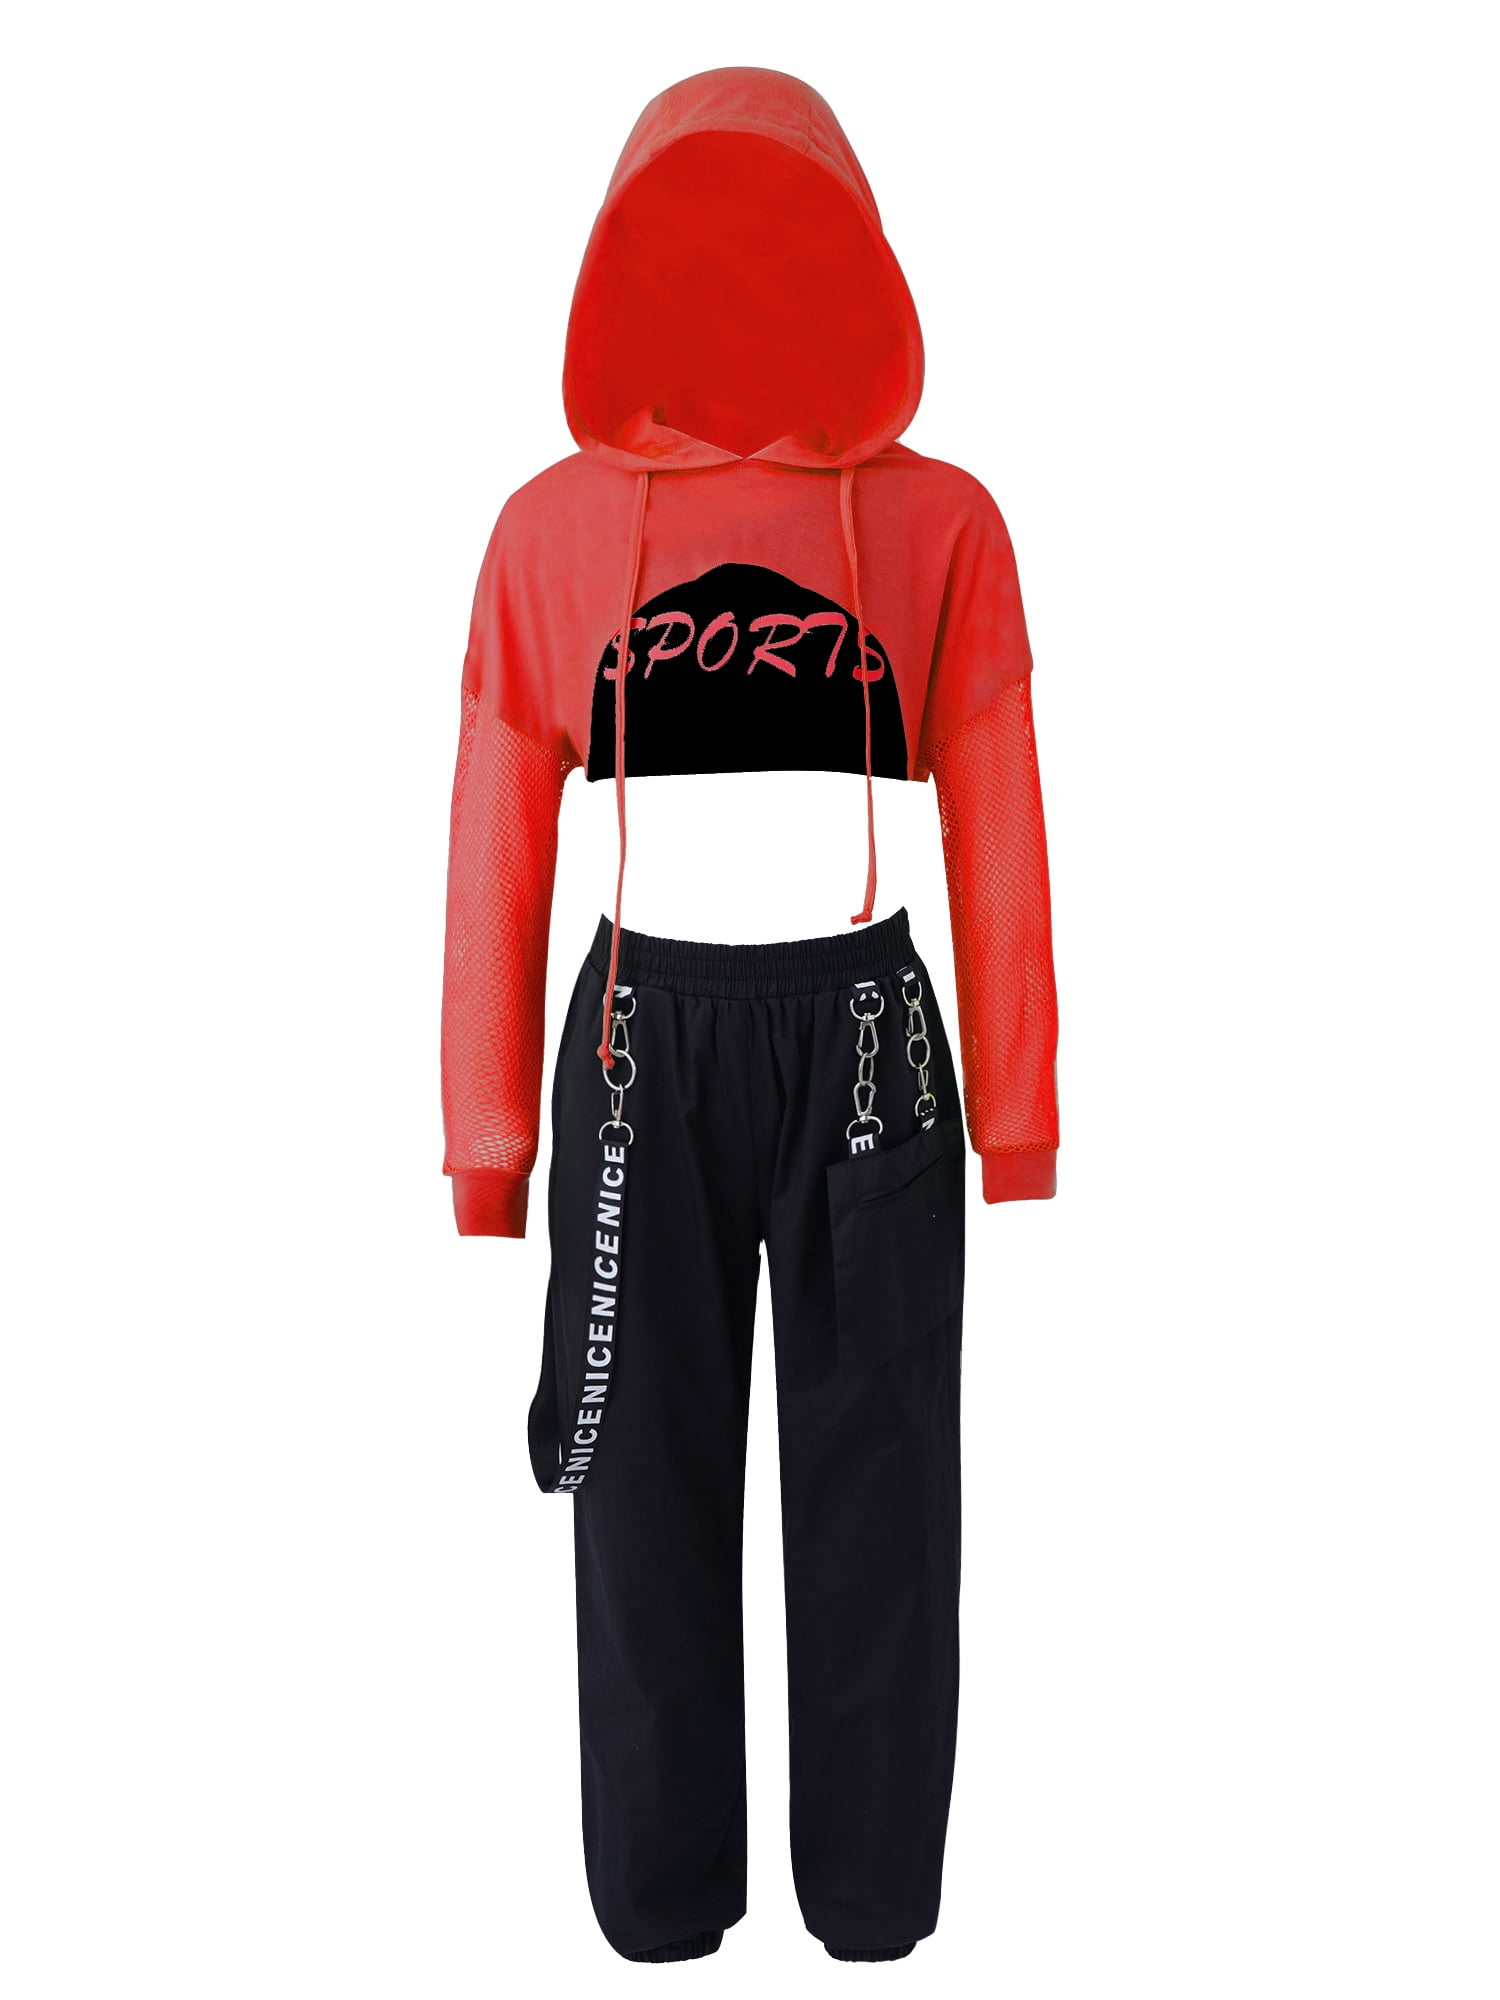 Purple red black hoodies cotton competition girls school competition hip  hop jazz dance clothes outfits- Material : CottonContent : Top and pants  Size:Size(cm)R